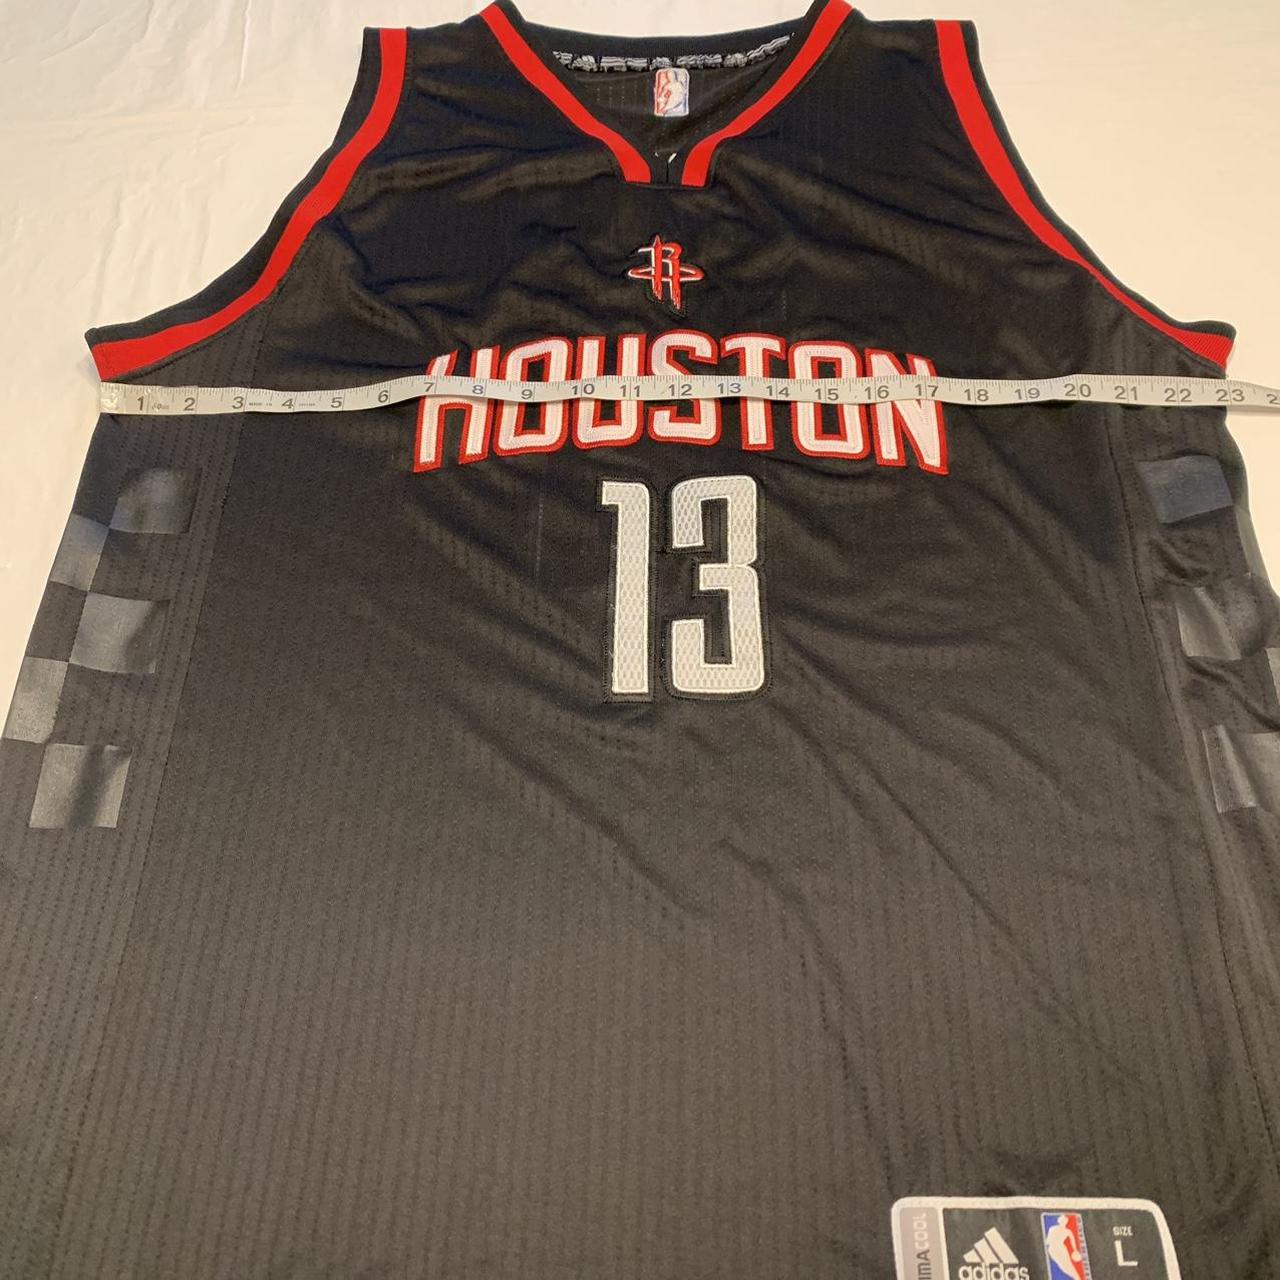 James Harden Red Houston Rockets Adidas Jersey (Size L)